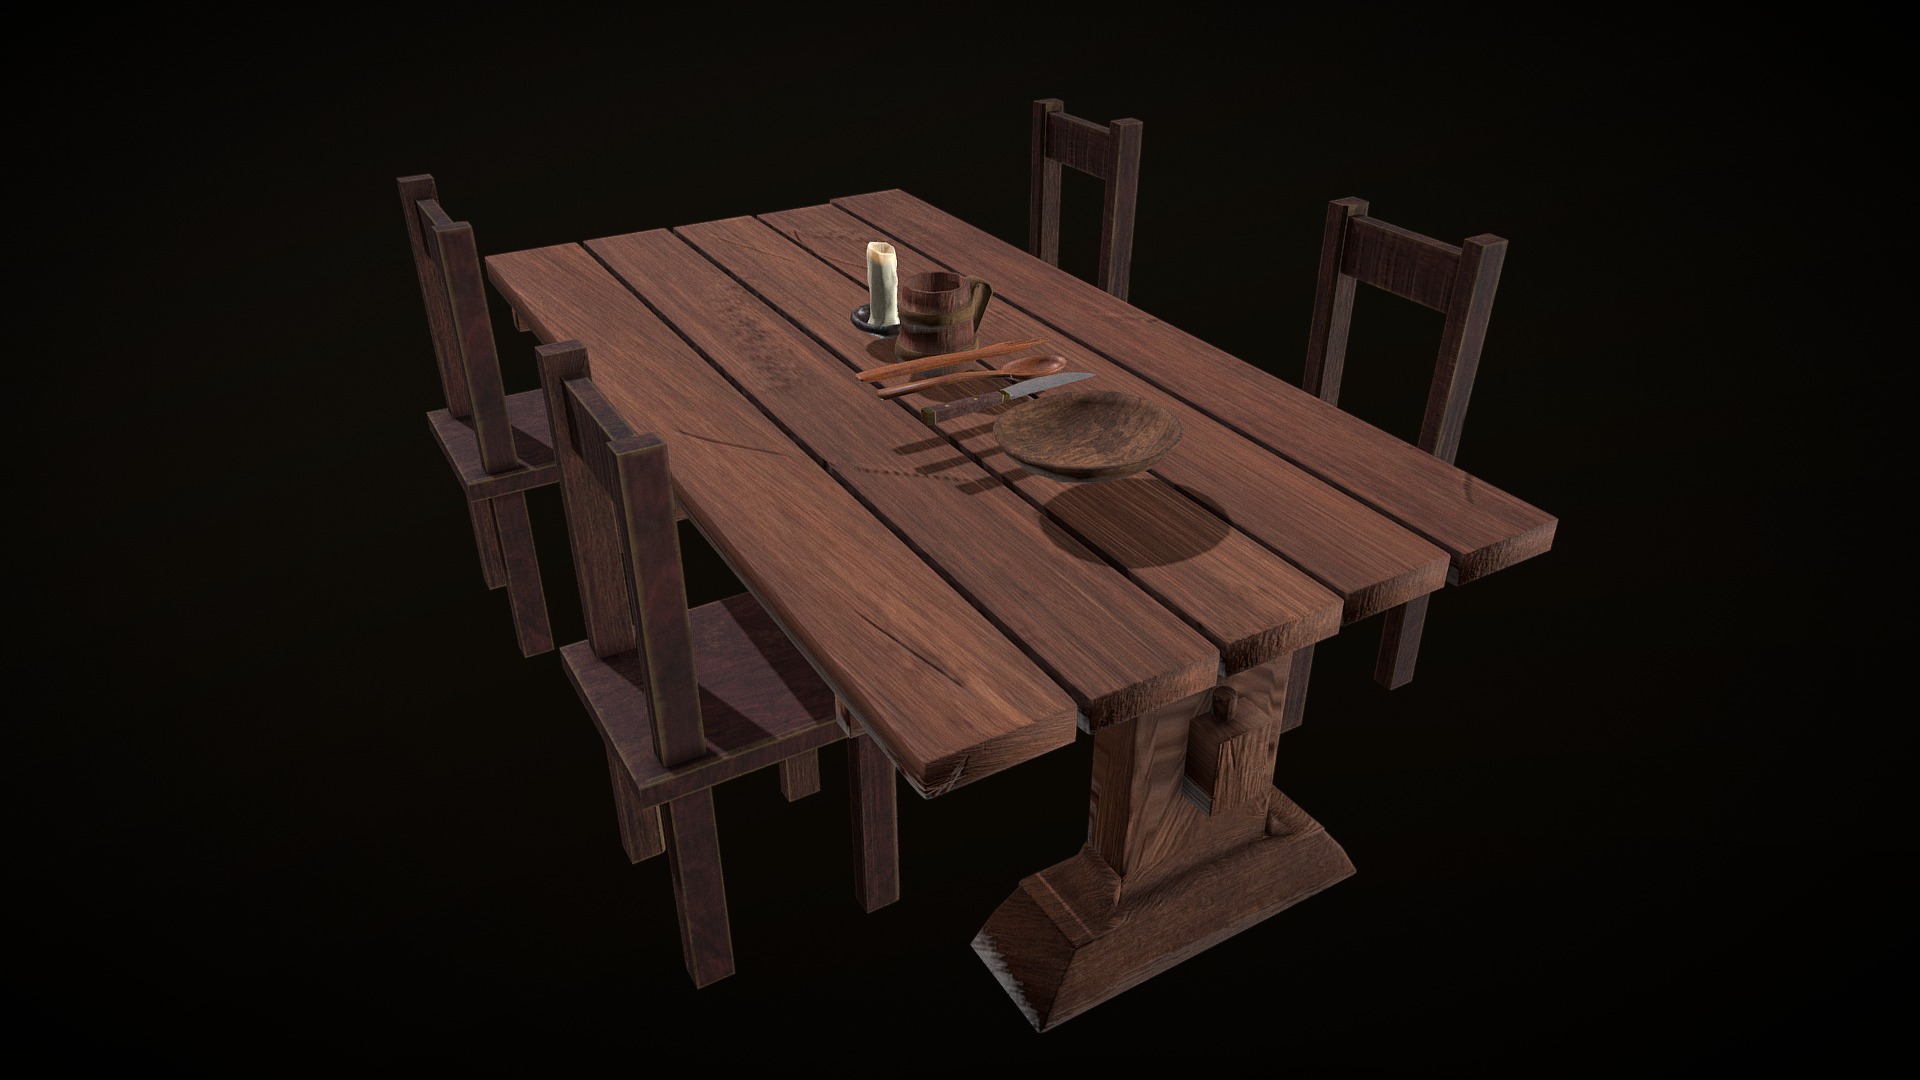 3D model Old table, chairs, candle and kitchenware KIT - This is a 3D model of the Old table, chairs, candle and kitchenware KIT. The 3D model is about a table with a plate and glasses on it.